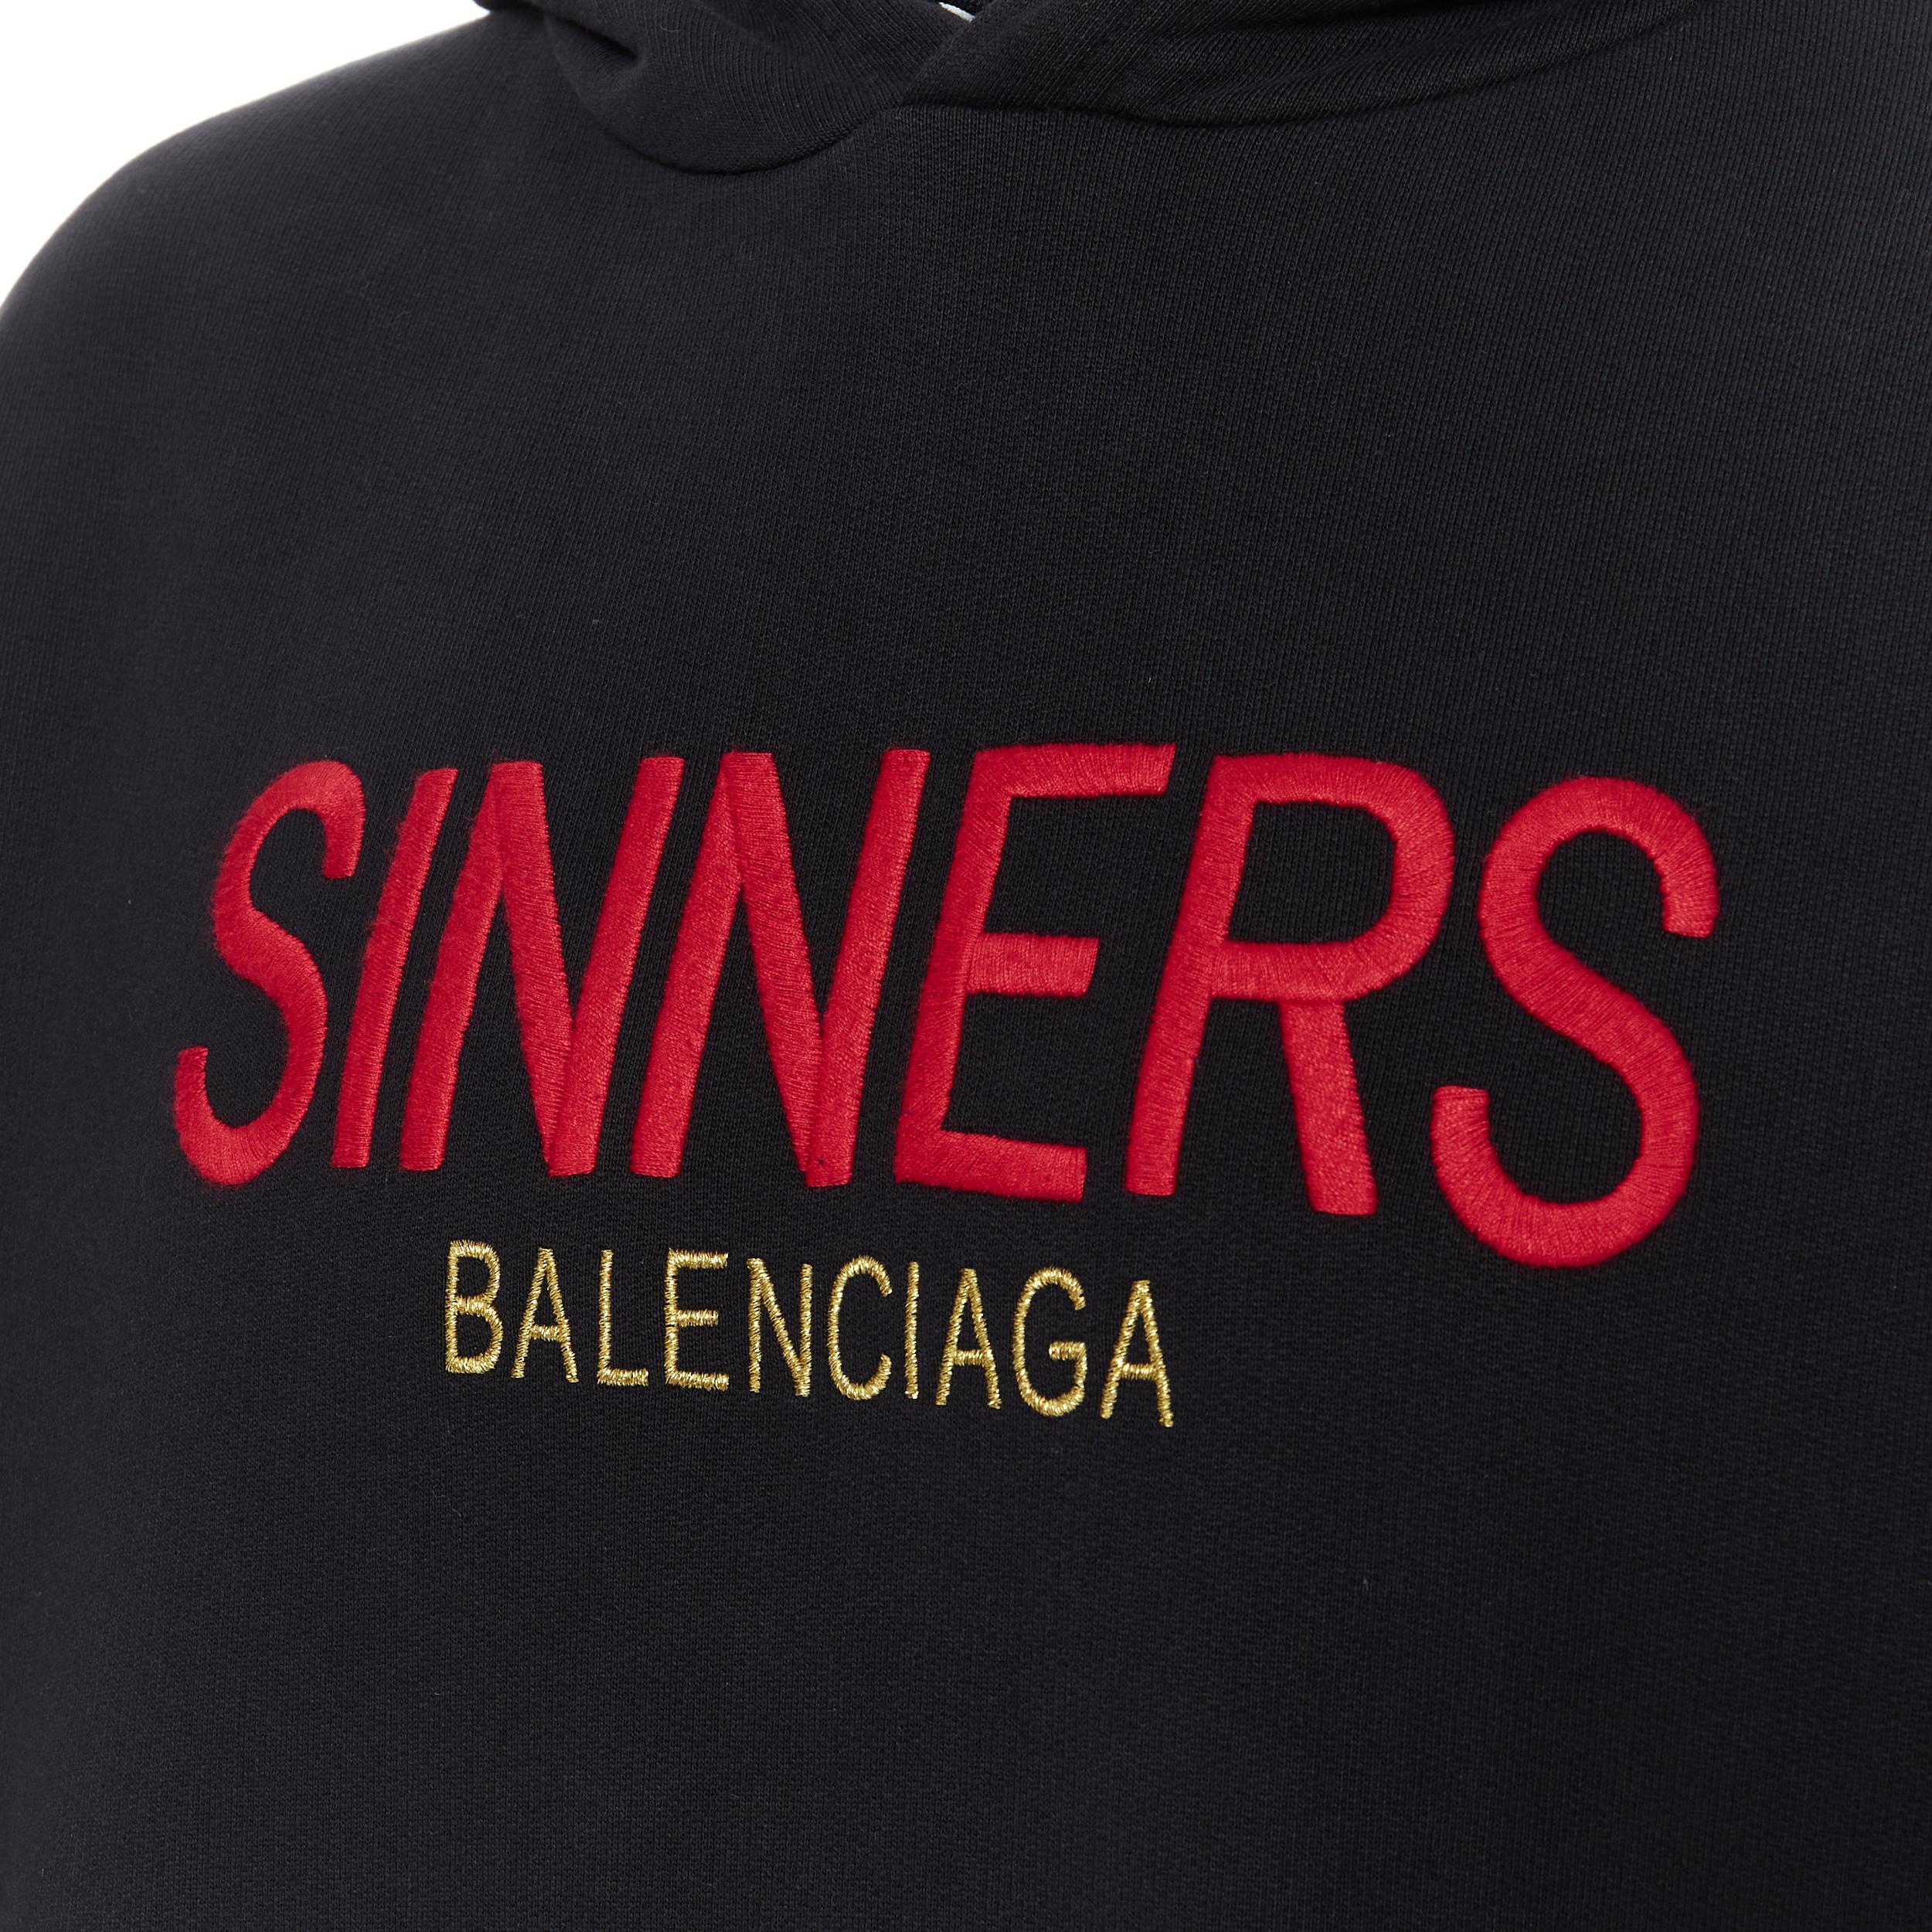 new BALENCIAGA DEMNA 2018 Sinners logo embroidery black hoodie pullover XL 
Reference: TGAS/B00175 
Brand: Balenciaga 
Designer: Demna Gvasalia 
Collection: 2018 
Material: Cotton 
Color: Black 
Pattern: Solid 
Made in: Italy 

CONDITION: